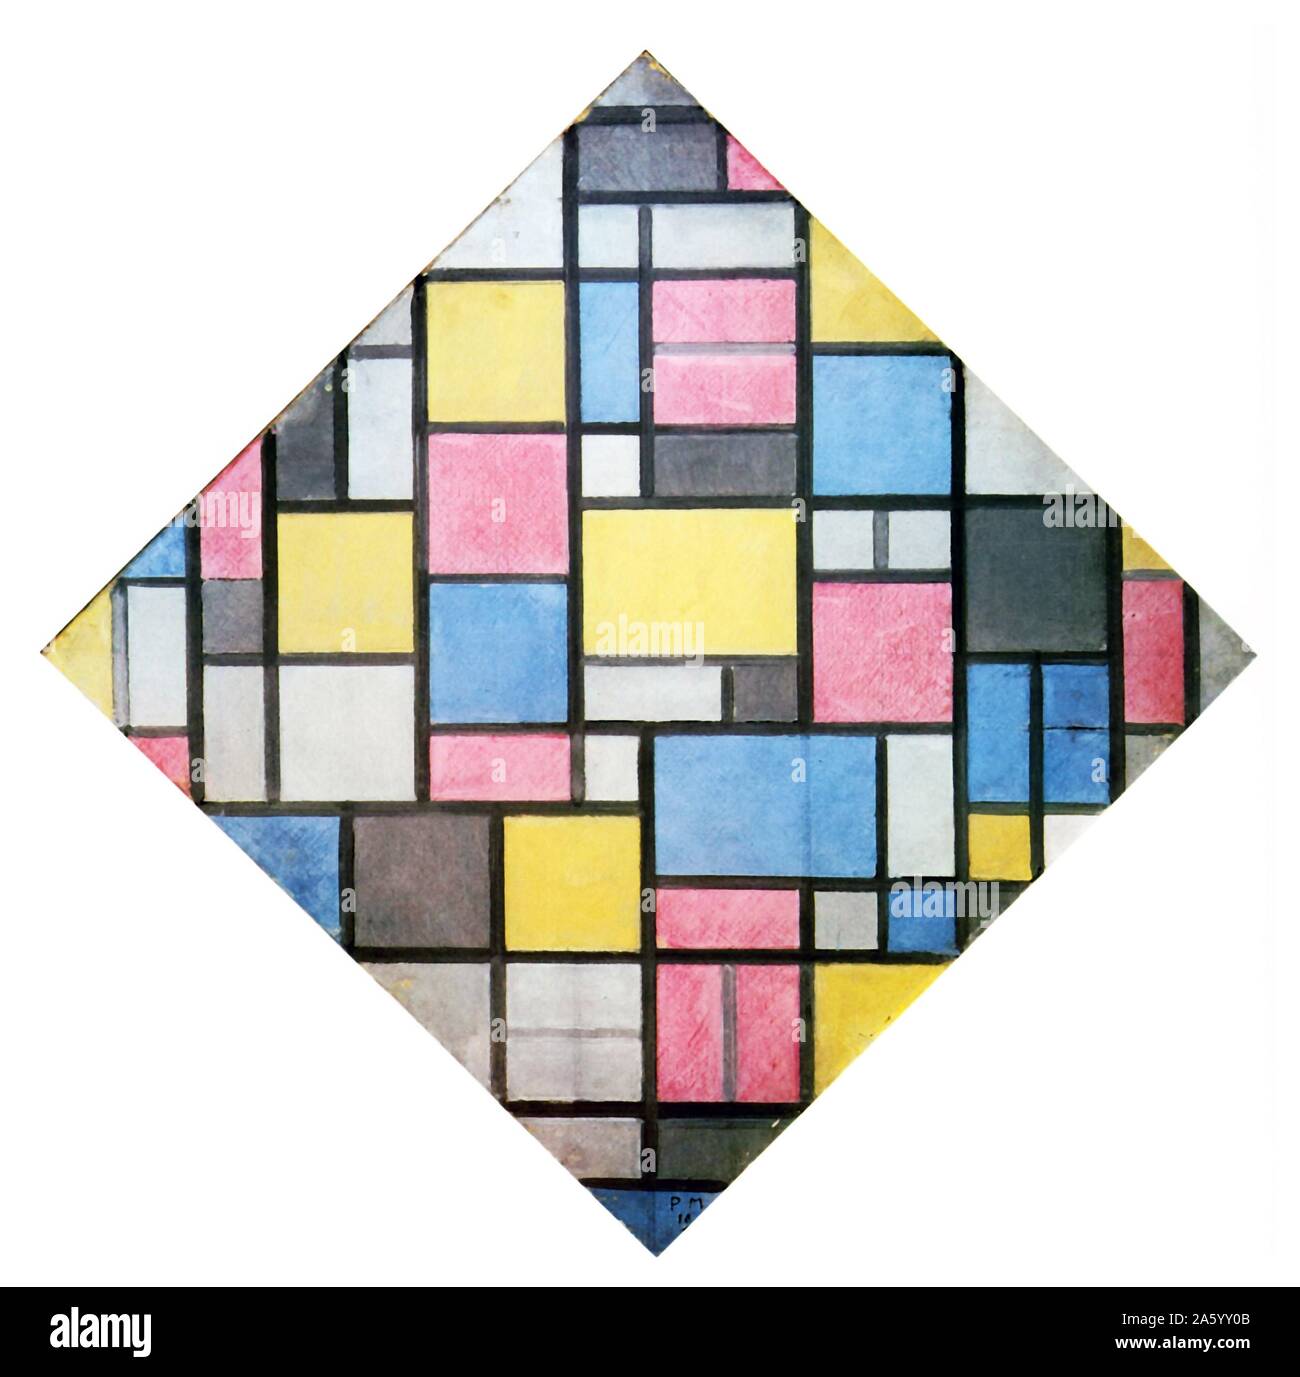 Painting titled 'Composition with Grid VII' by Piet Mondrian (1872-1944) Dutch painter. He was a contributor to the De Stijl art movement and group, which was founded by Theo van Doesburg. He evolved a non-representational form which he termed neoplasticism. Dated 1919 Stock Photo